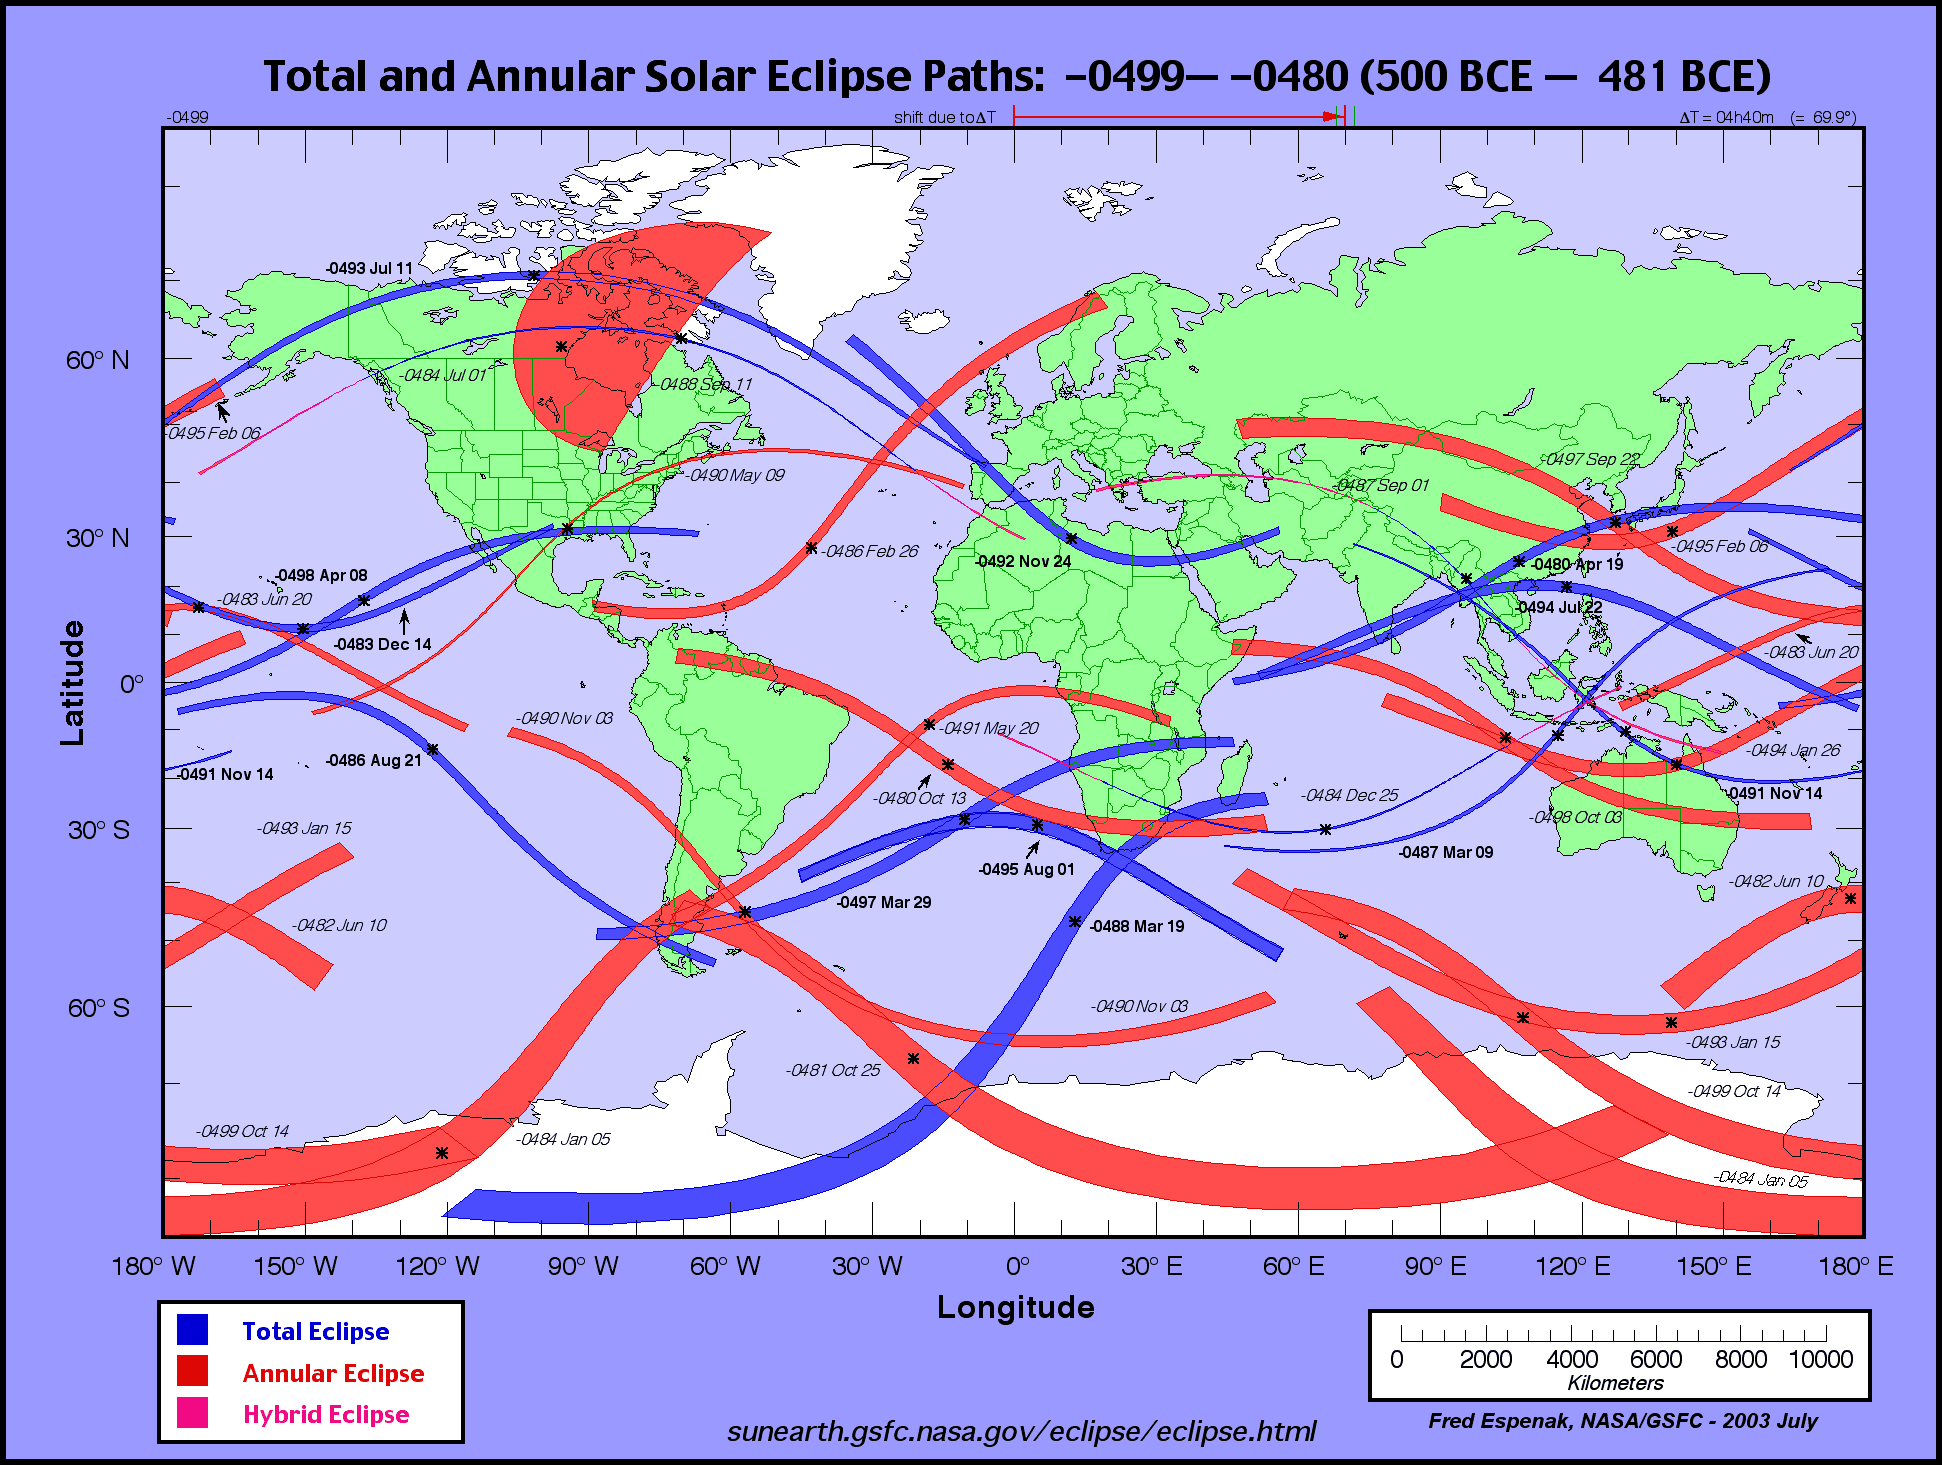 Total and Annual Solar Eclipse Paths 2021-2040. Total and Annual Solar Eclipse Paths.